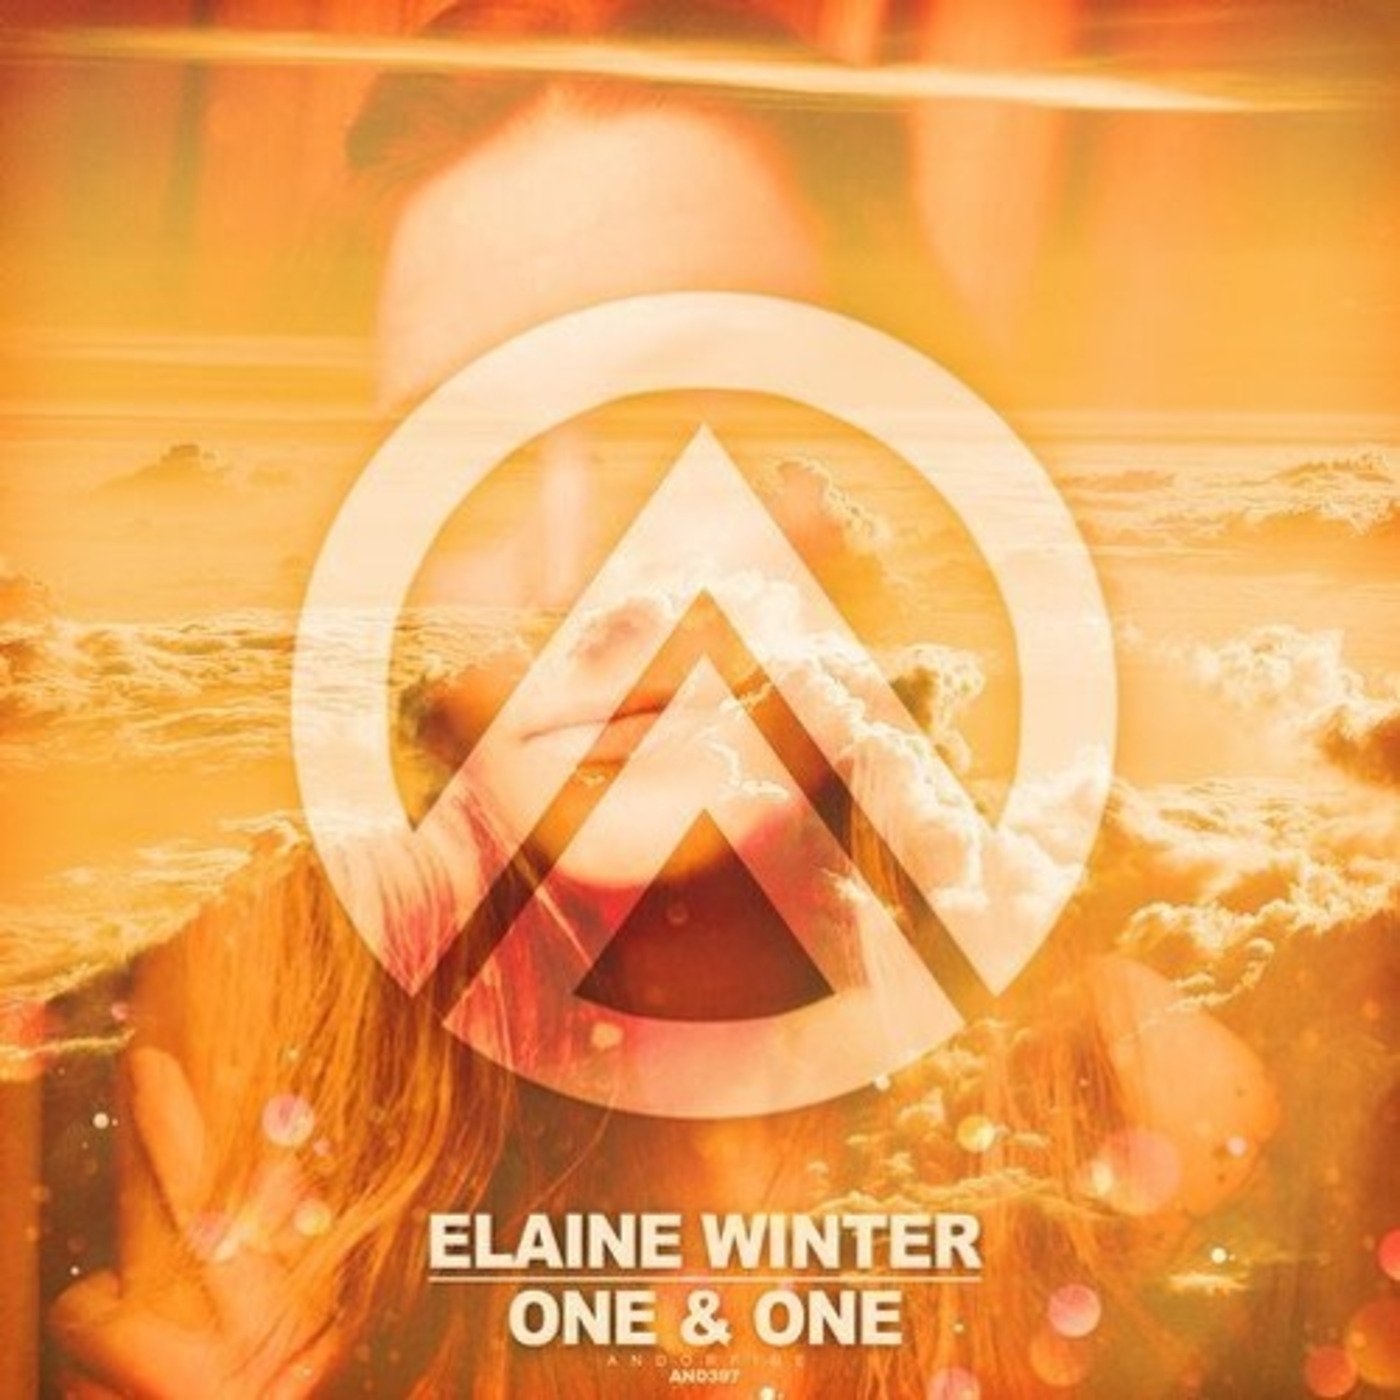 Elaine Winter - One & One (Coco Fay Remix)